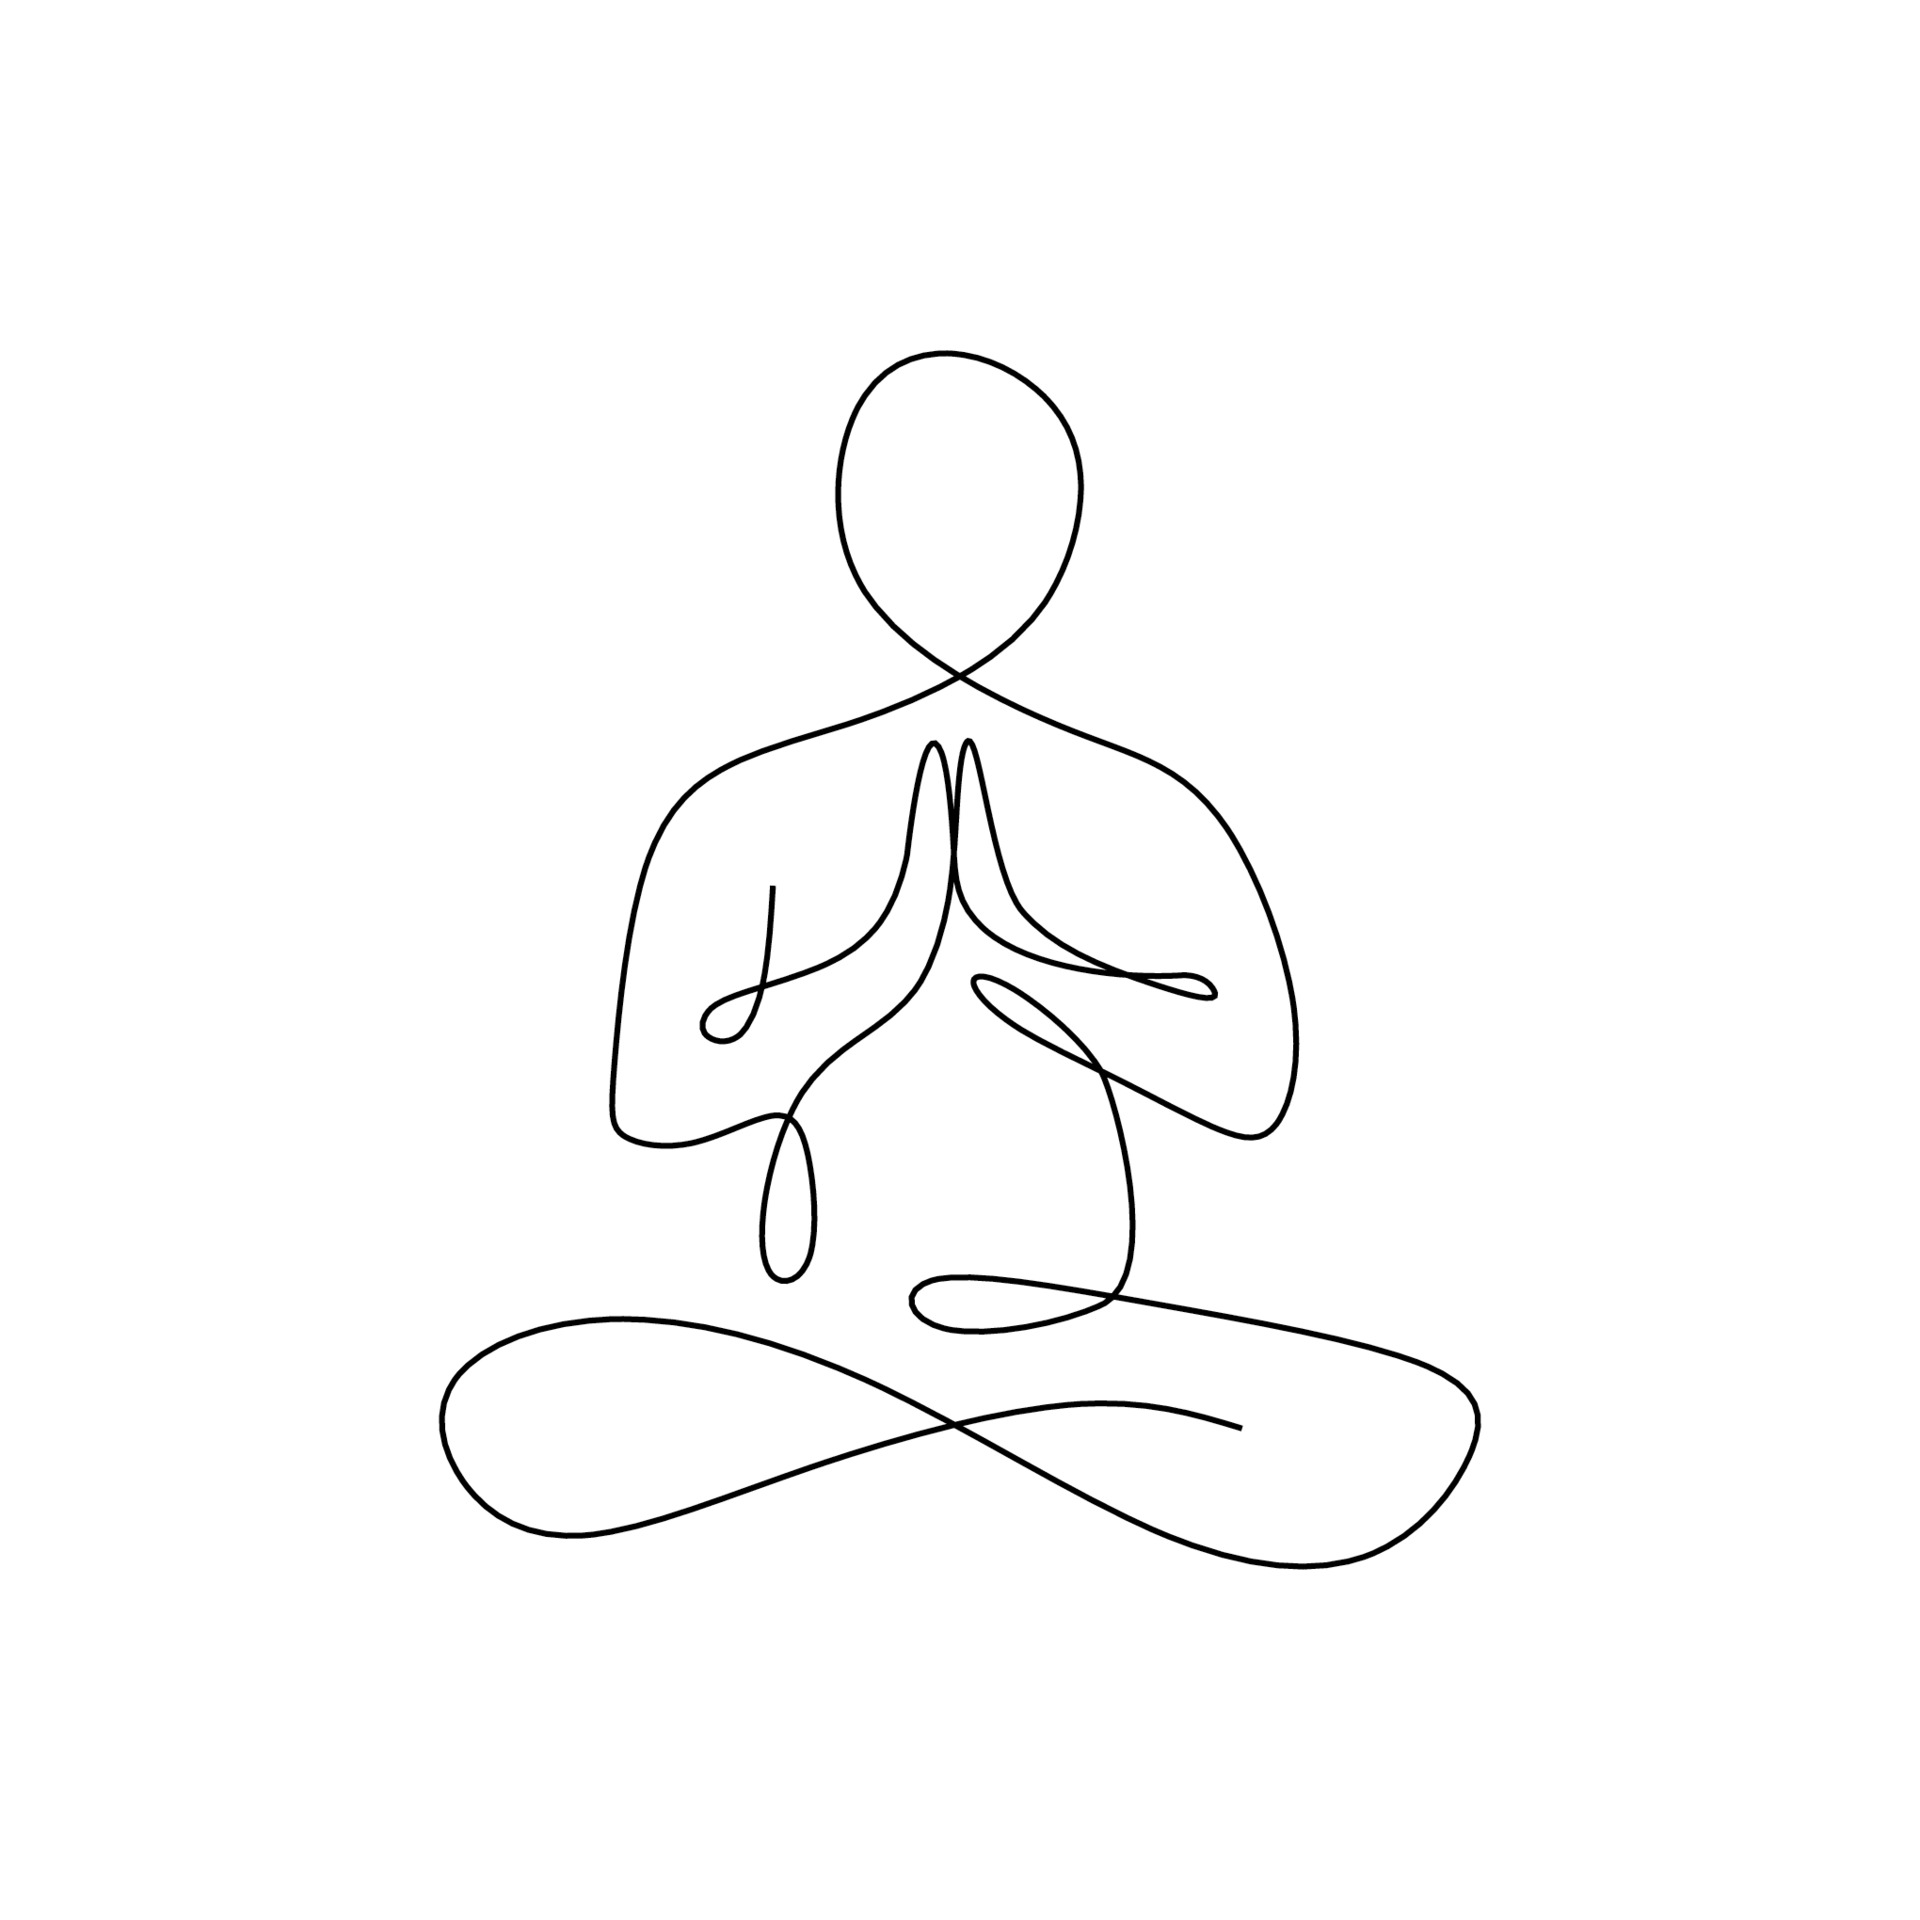 Continuous one line drawing. Man sitting cross legged meditating